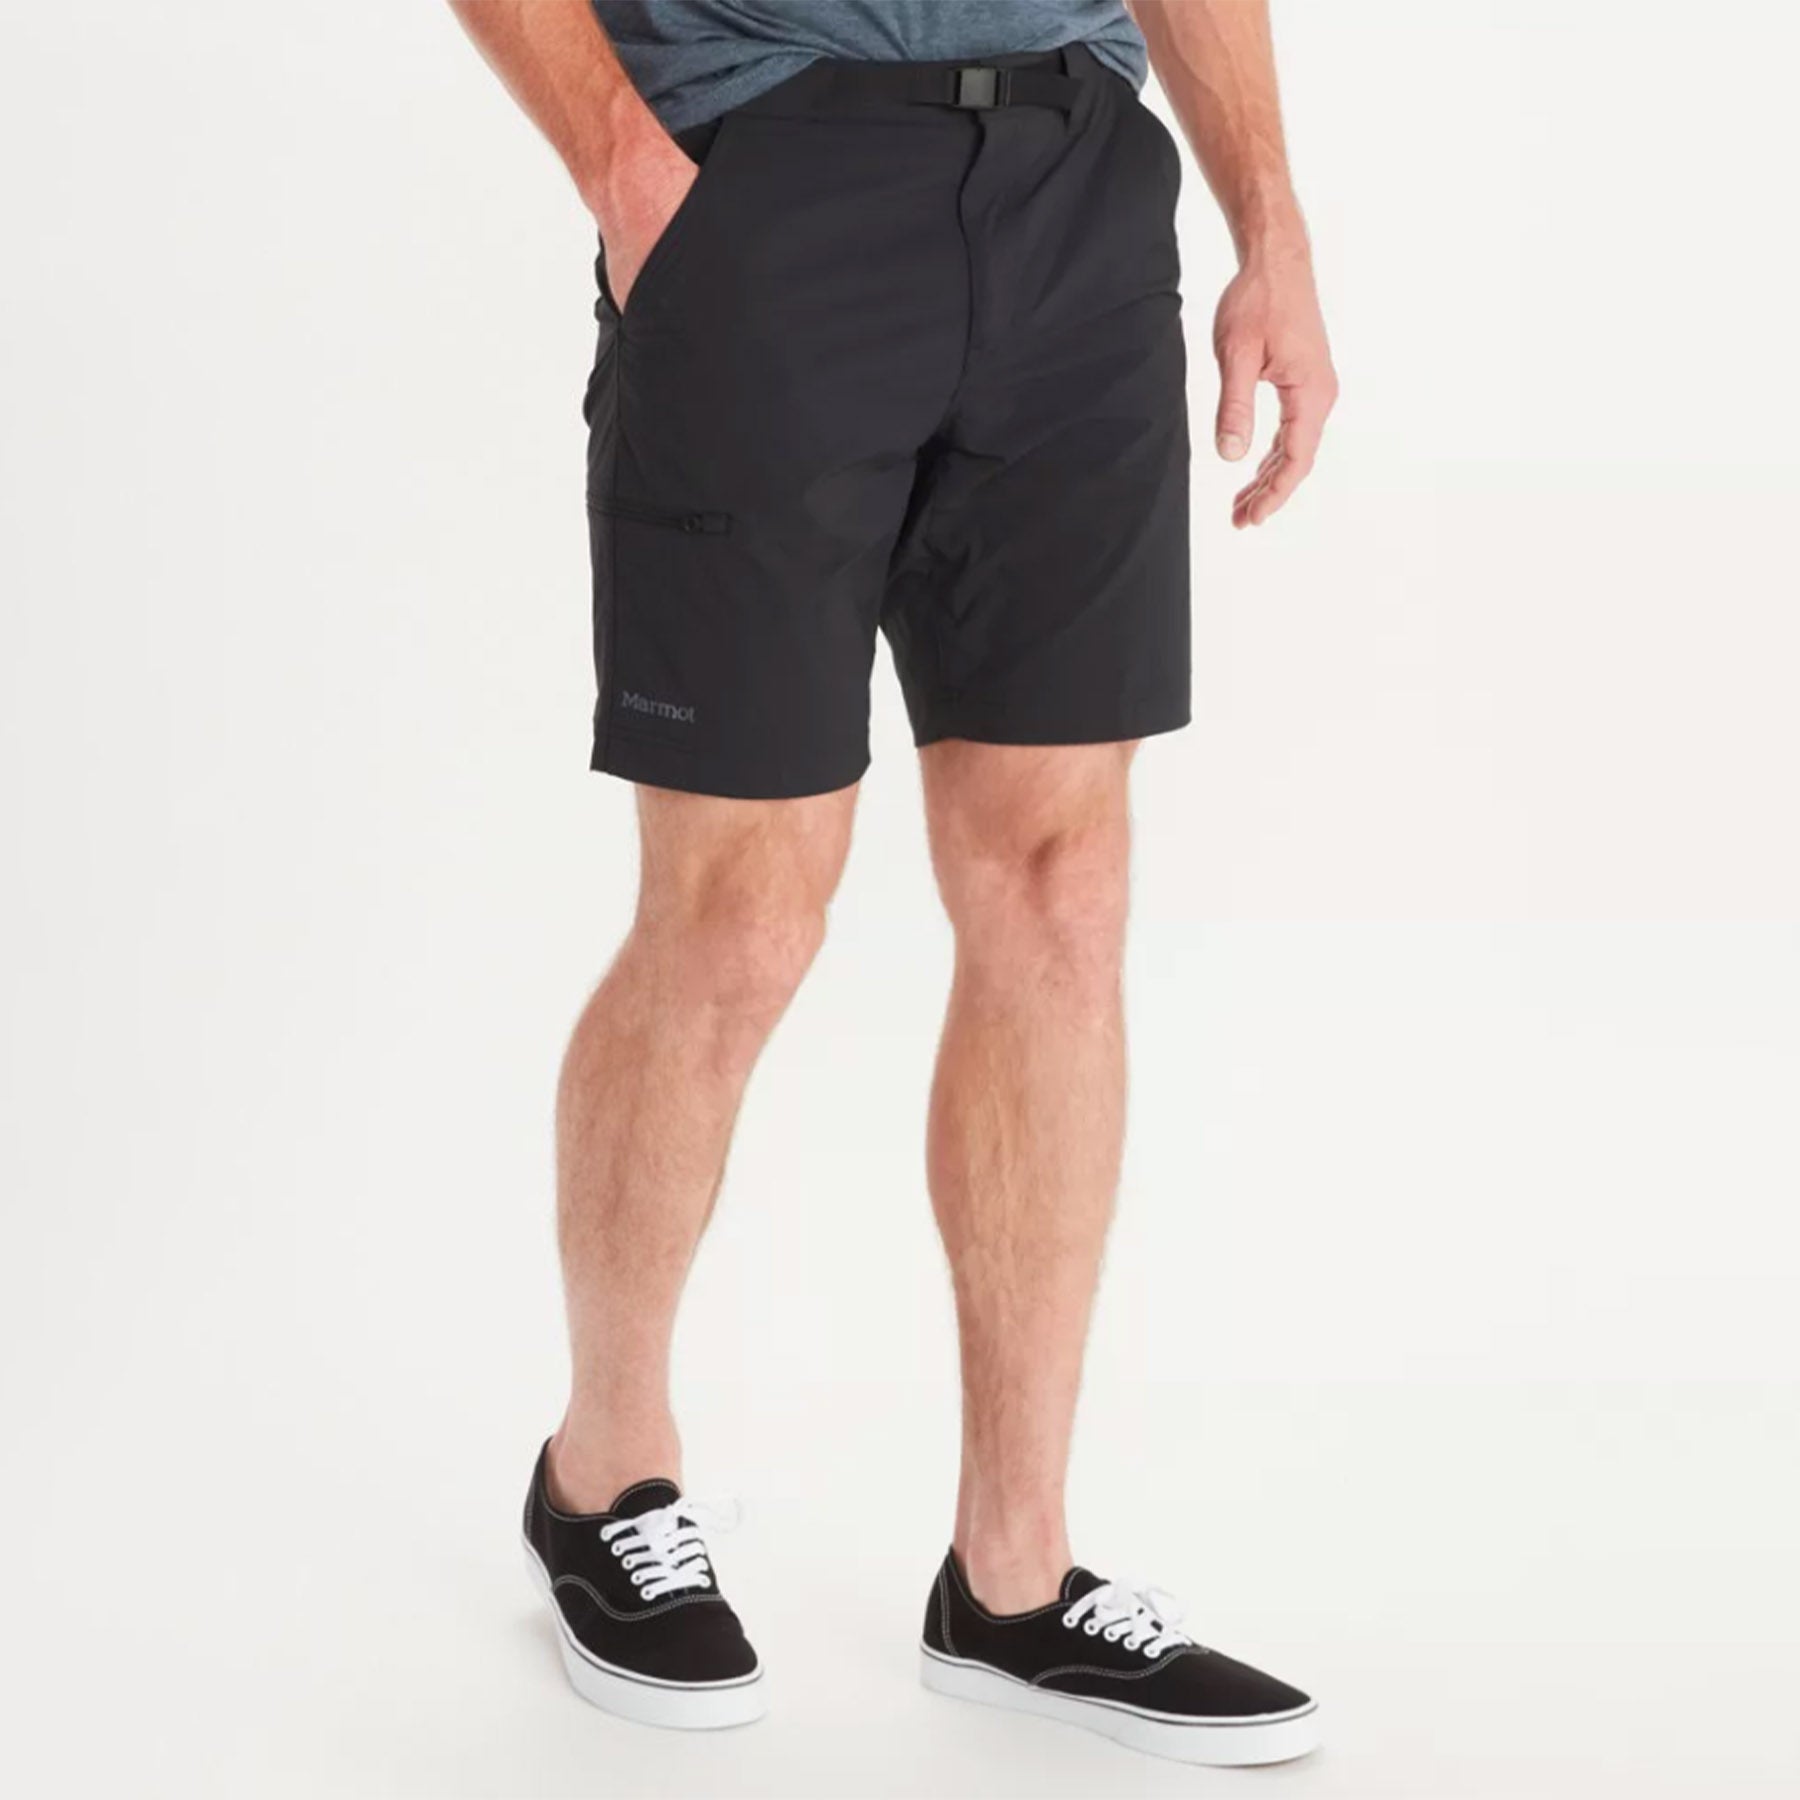 Hero image featuring the front of the Marmot Men's Arch Short in black